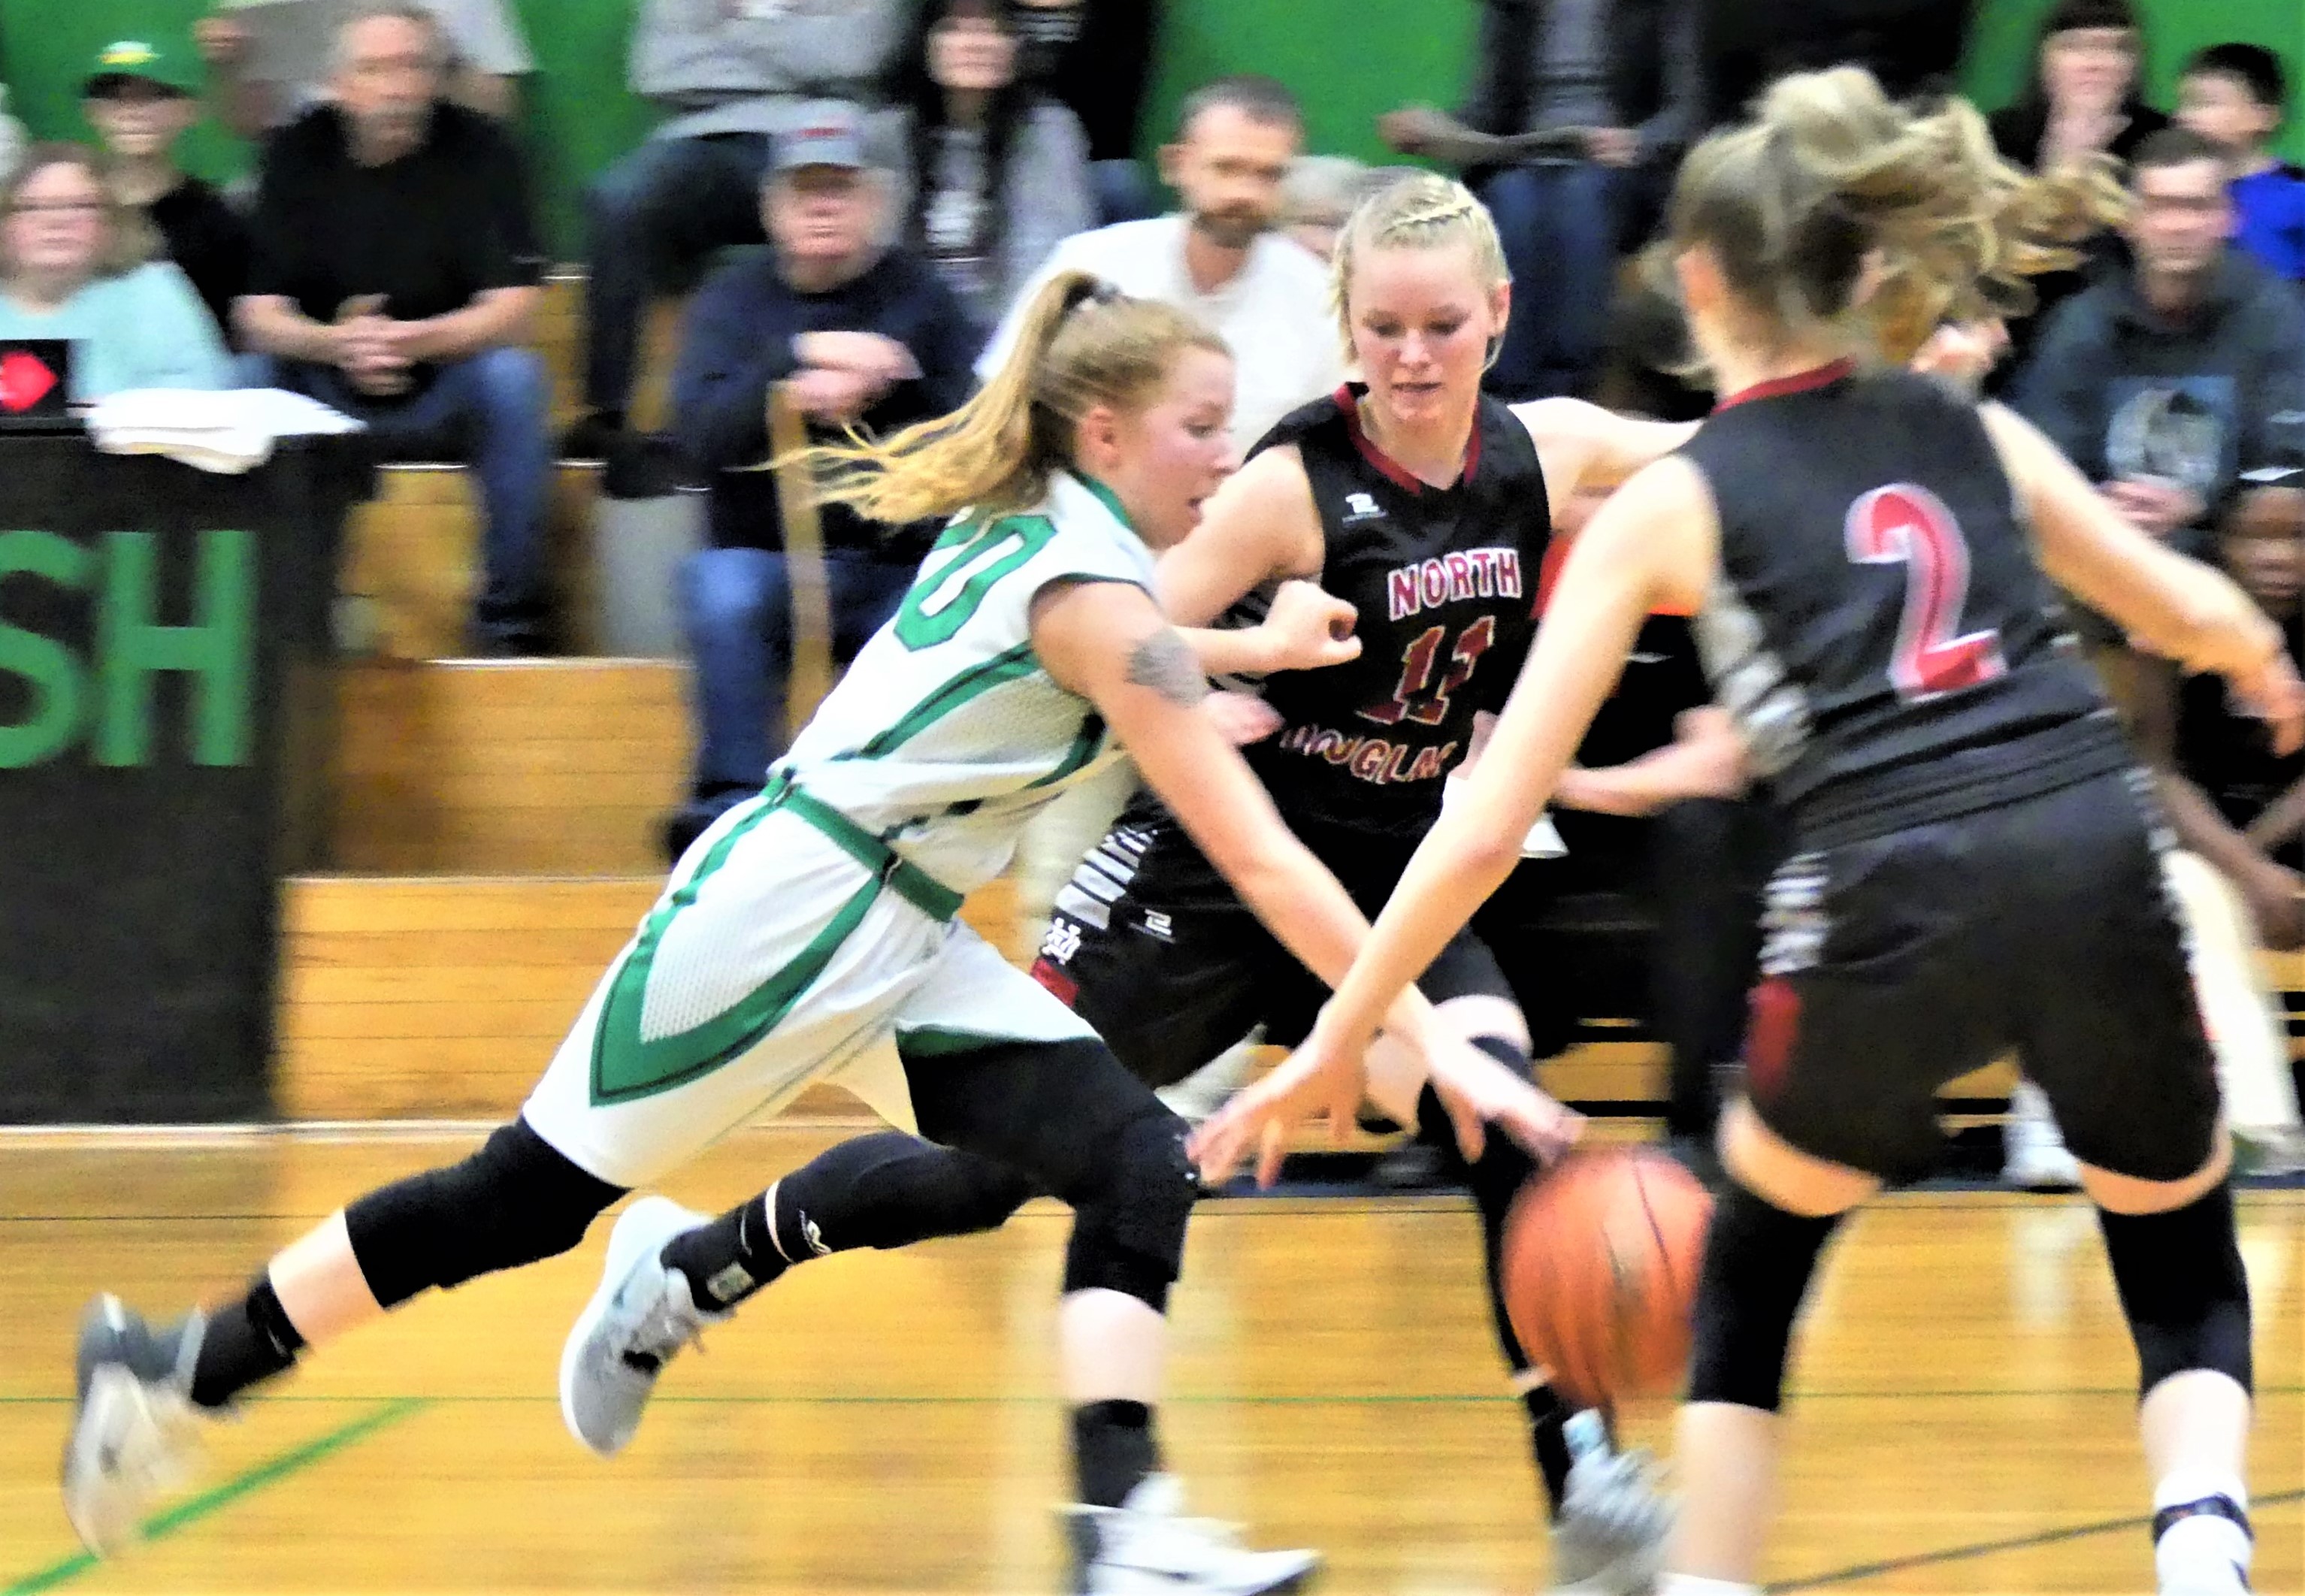 Player dribbles the ball down the court.